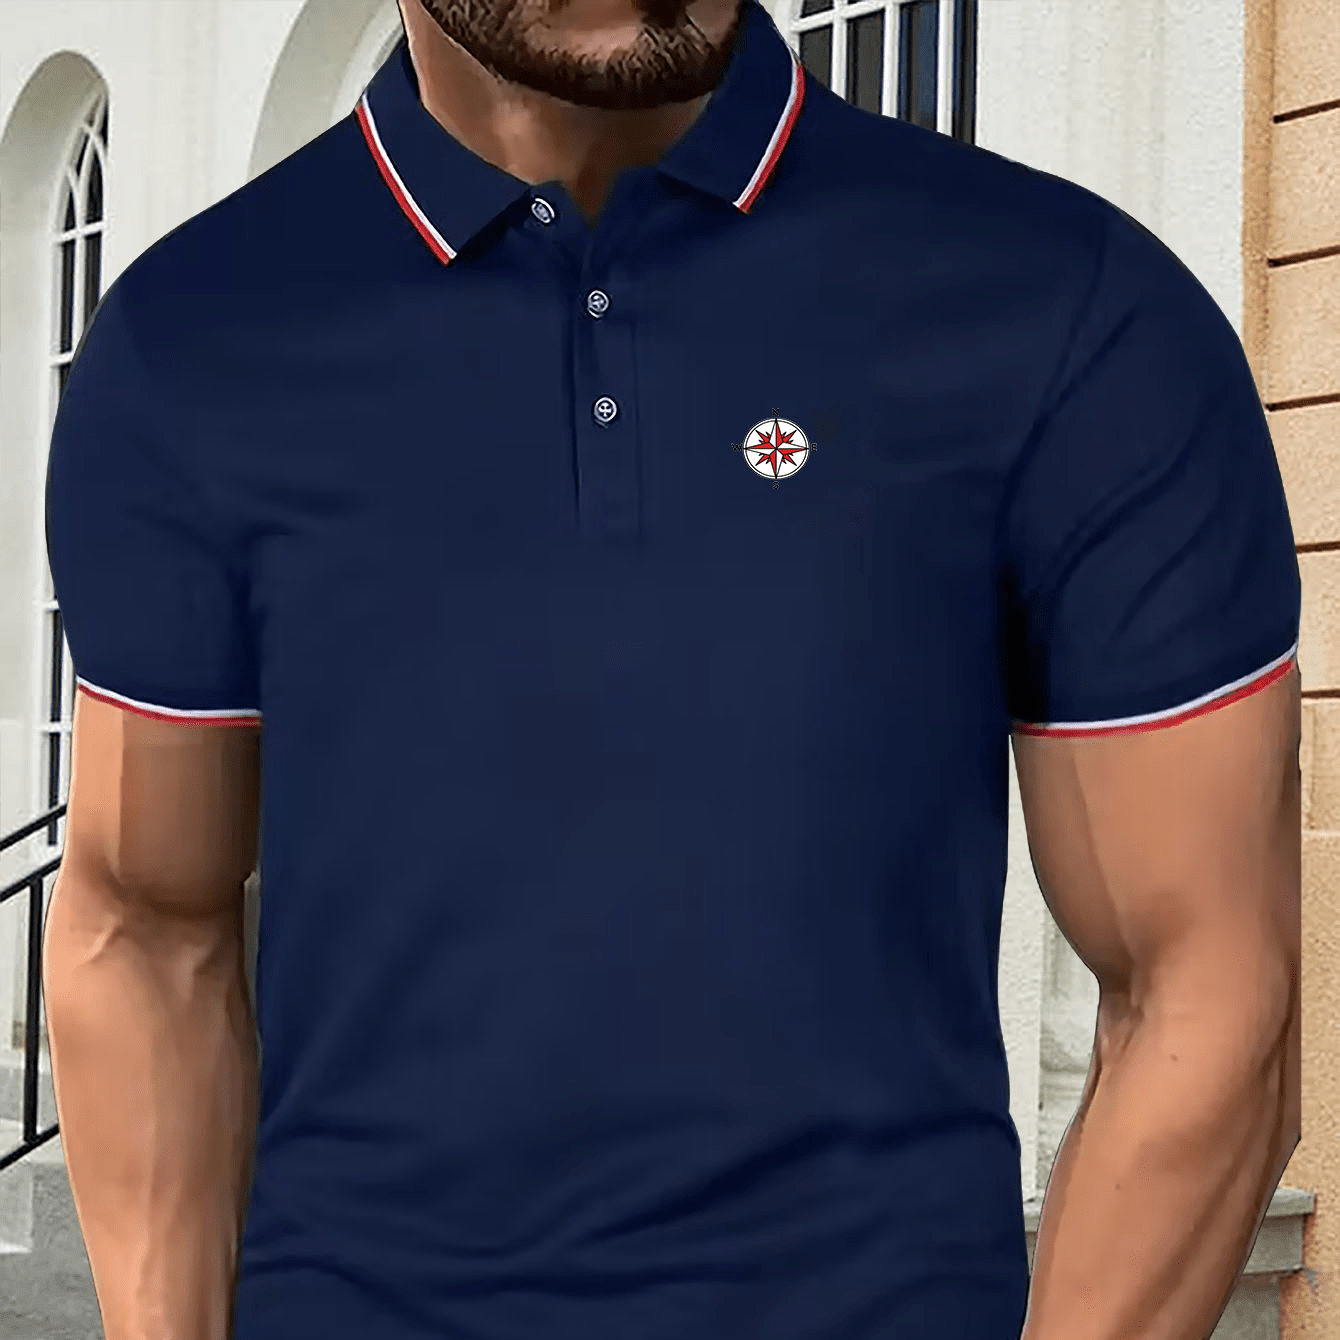 

Geometric Patterned Men's Casual Summer Short Sleeve Polo Shirt - Polyester Blend, Button Down, Regular Fit